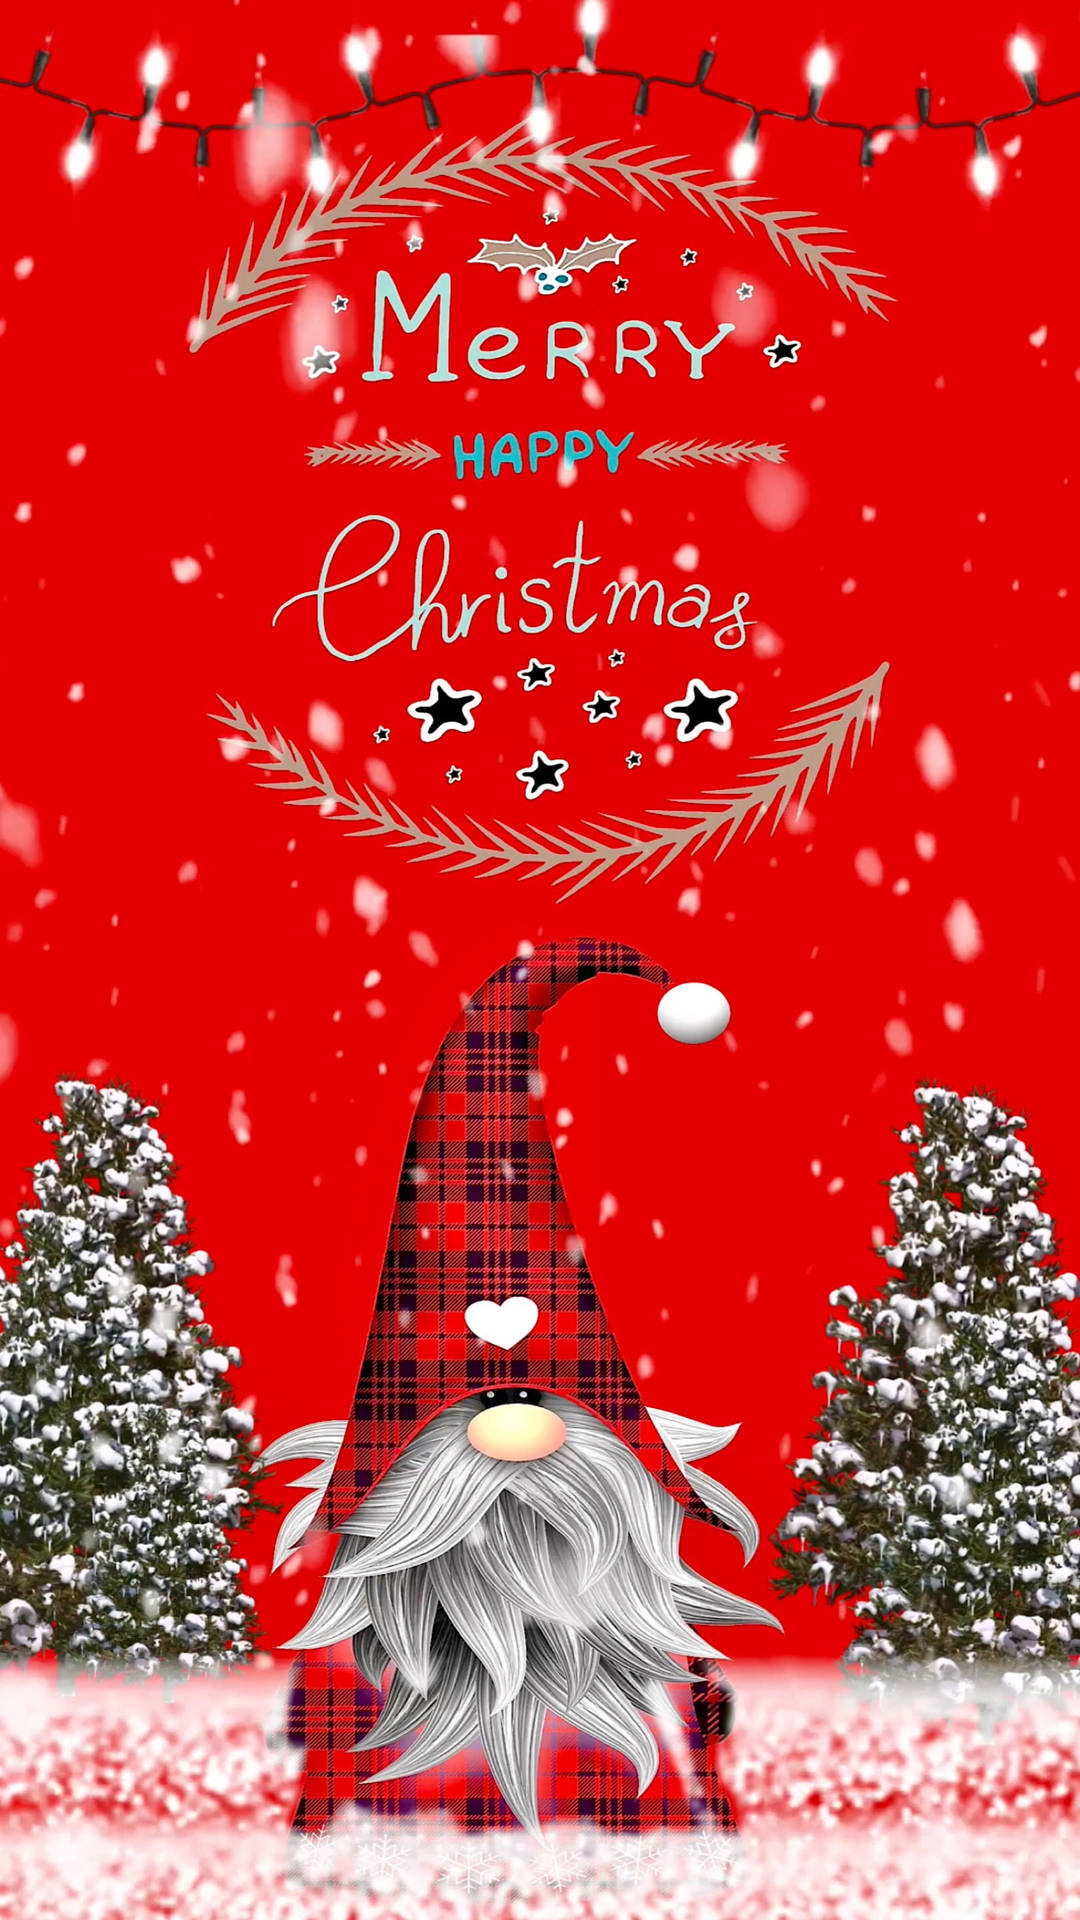 Red and black tartan plaid scottish Seamless Pattern Texture from tartan  plaid tablecloths shirts clothes dresses bedding blankets textile Christmas  wallpaper wrapping paper background 12571500 Stock Photo at Vecteezy